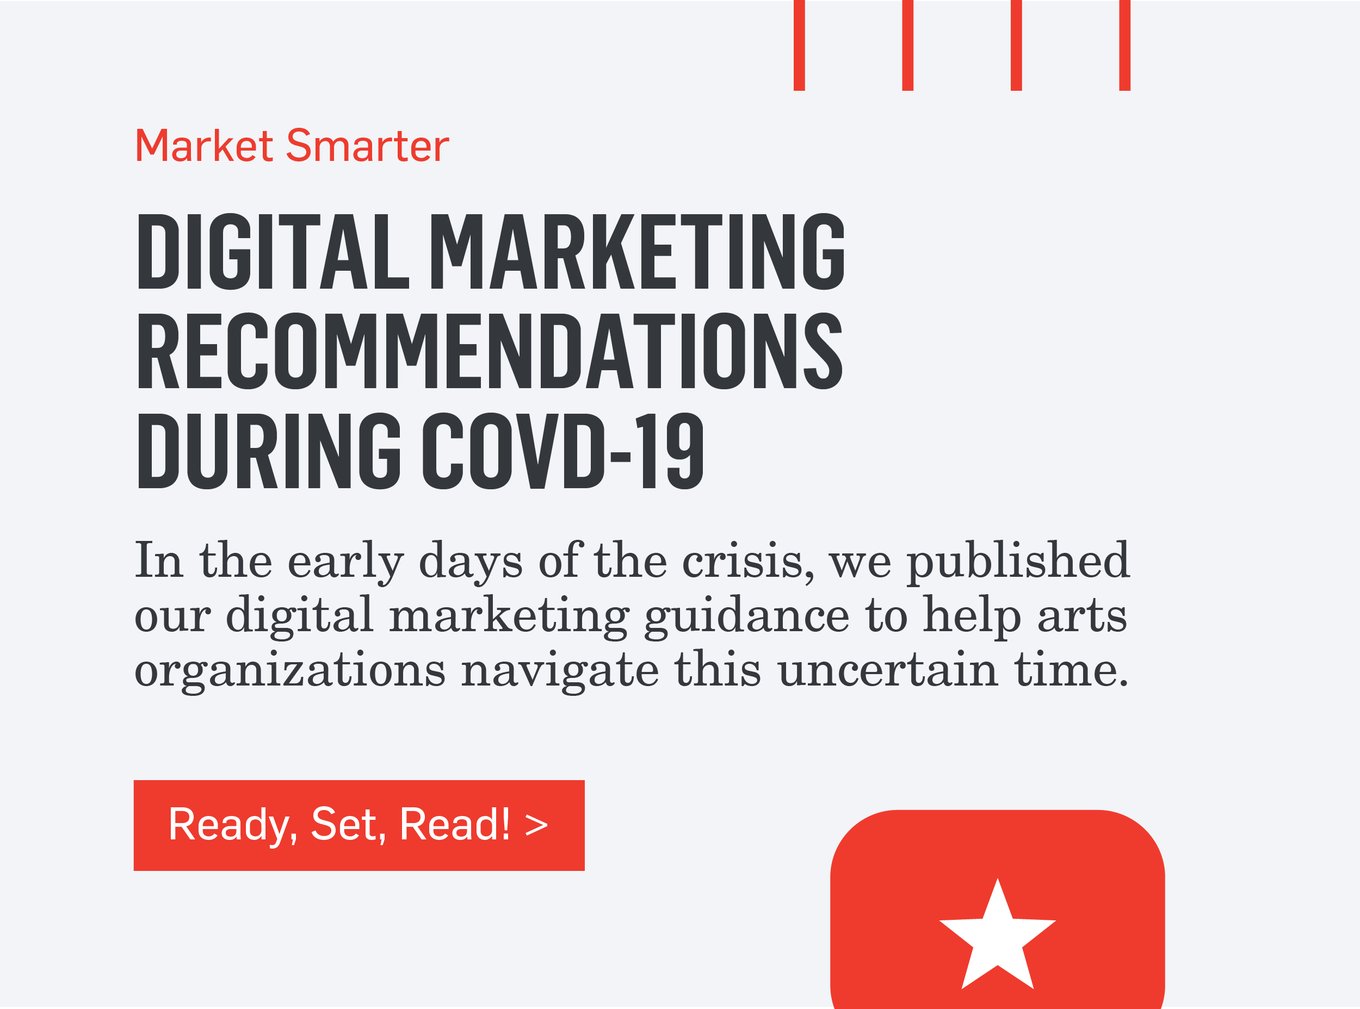 Market Smarter - DIGITAL RECOMMENDATIONS DURING COVID-19 - In the early days of the crisis, we published our digital marketing guidance to help arts organizations navigate this uncertain time. >>>Ready, Set, Read!>>>